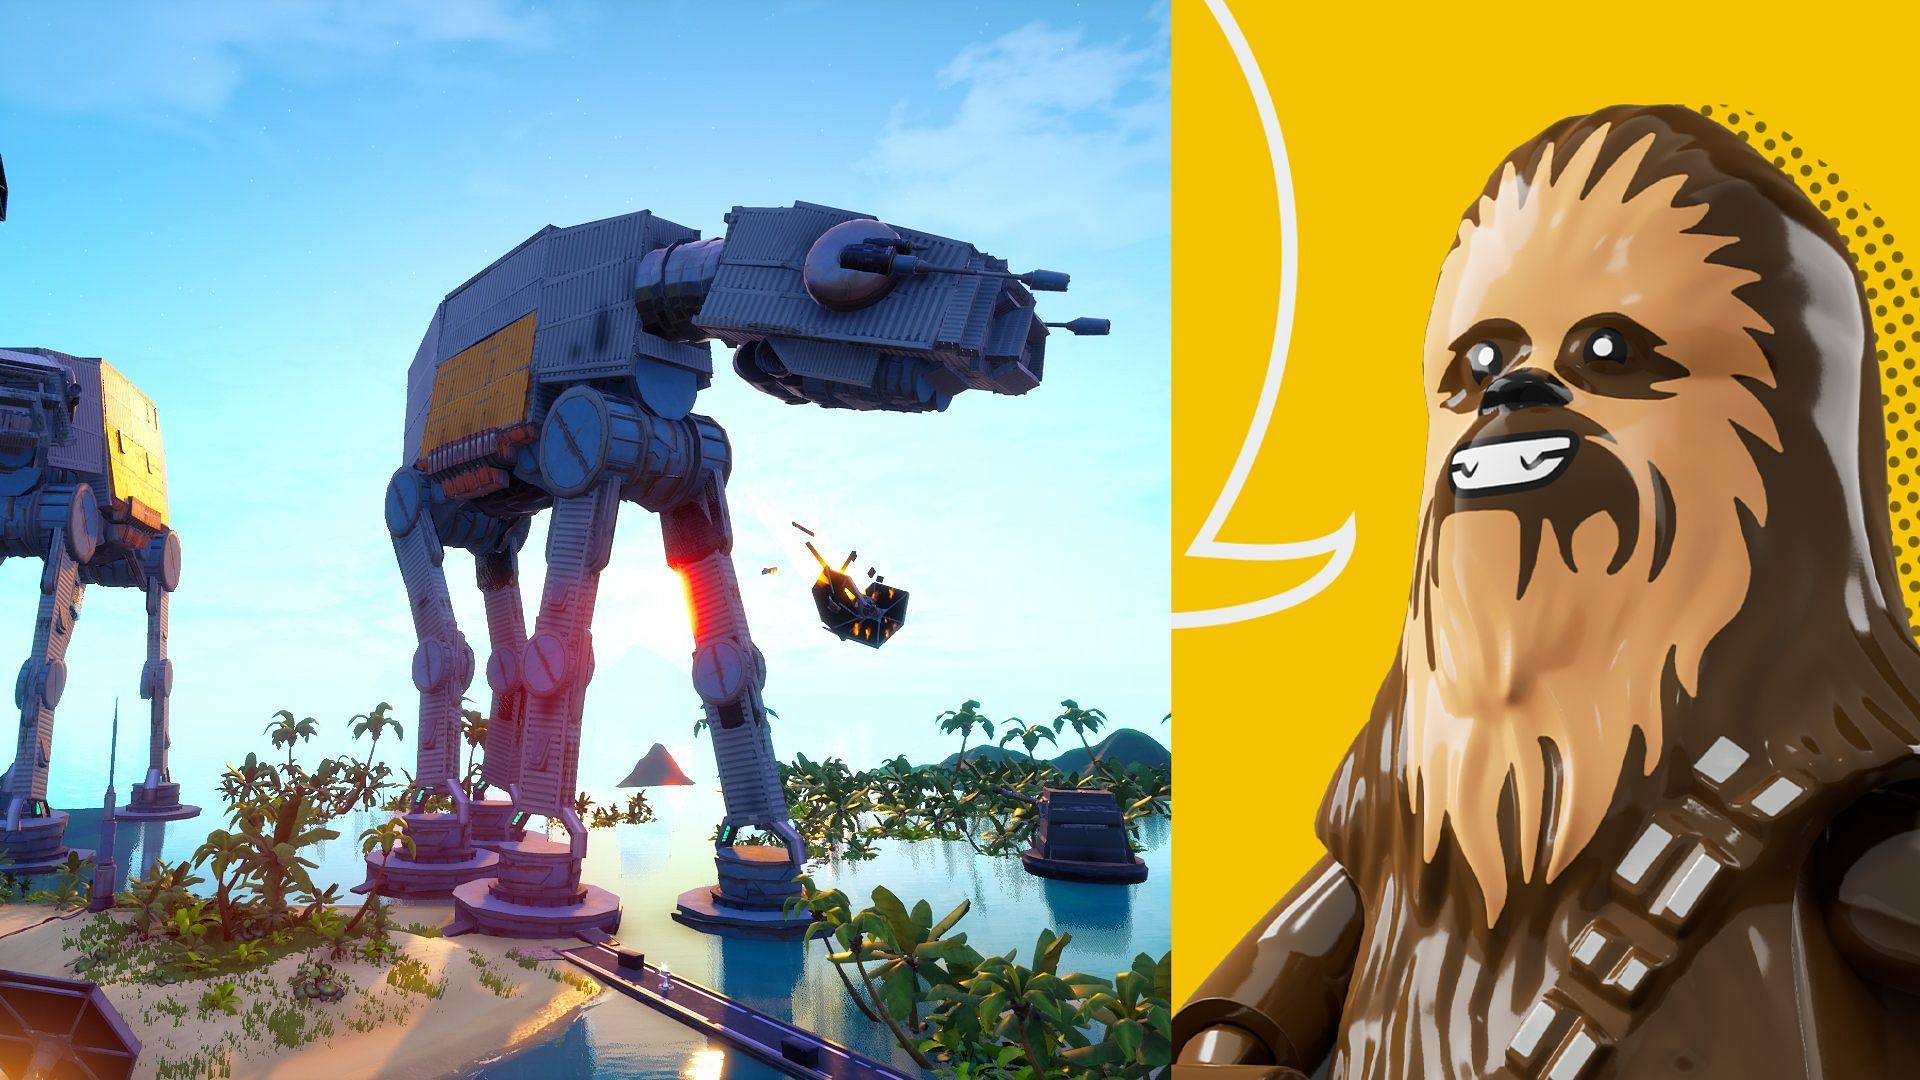 LEGO Fortnite Chewbacca skin confirmed for upcoming Star Wars collaboration